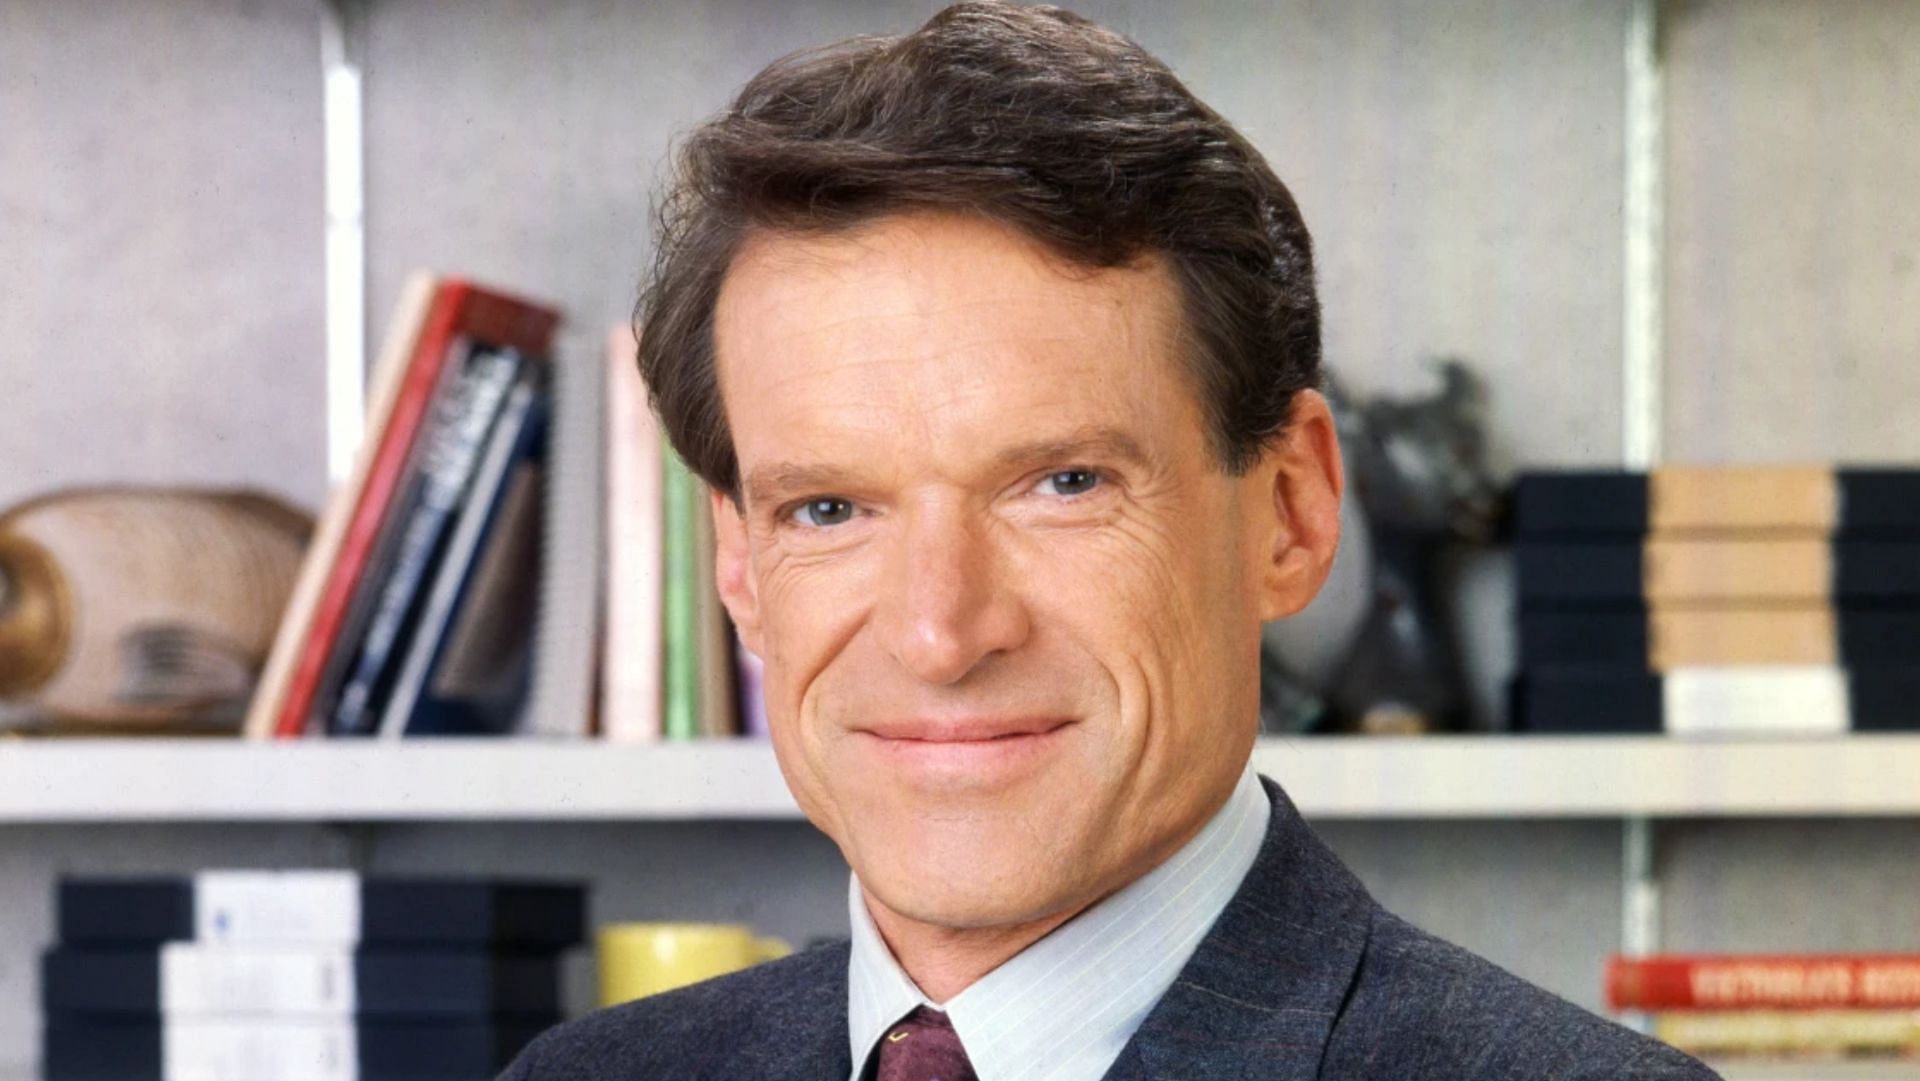 Charles Kimbrough was best recognised for his role in Murphy Brown (Image via NBC News)